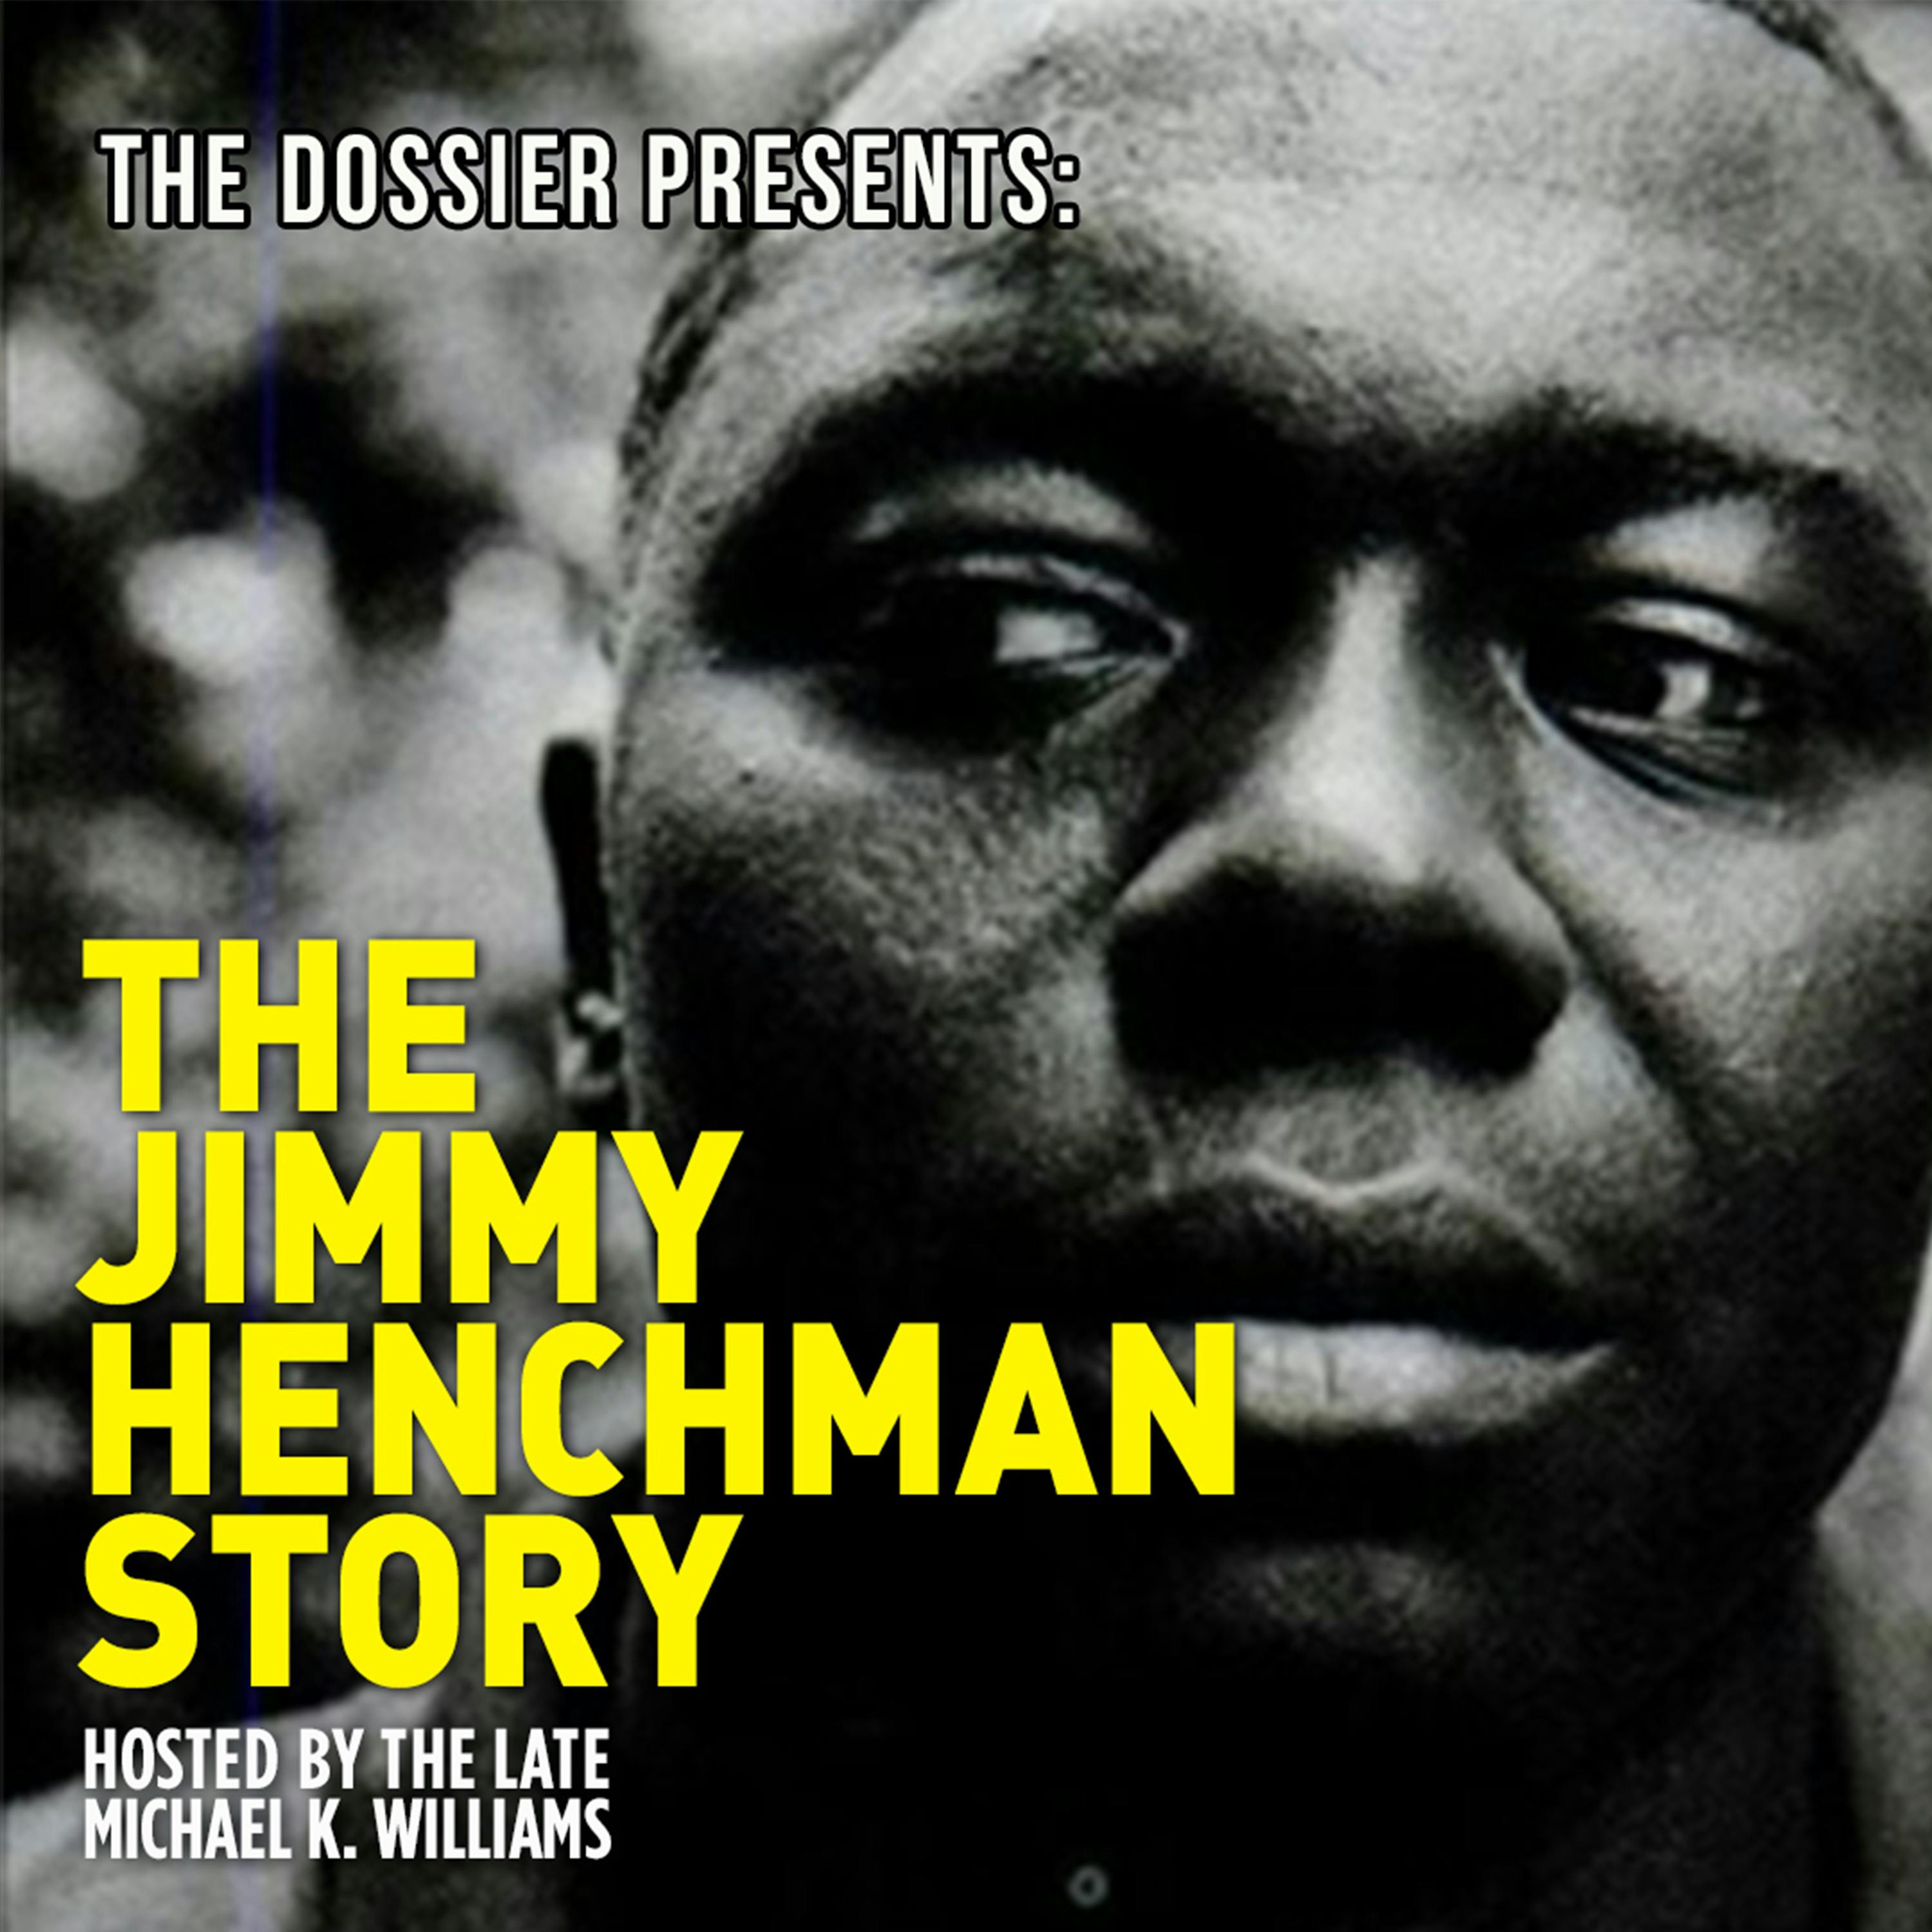 THE JIMMY HENCHMAN STORY - EP. 15 - BRUCE MAFFEO INTERVIEW PT. 1